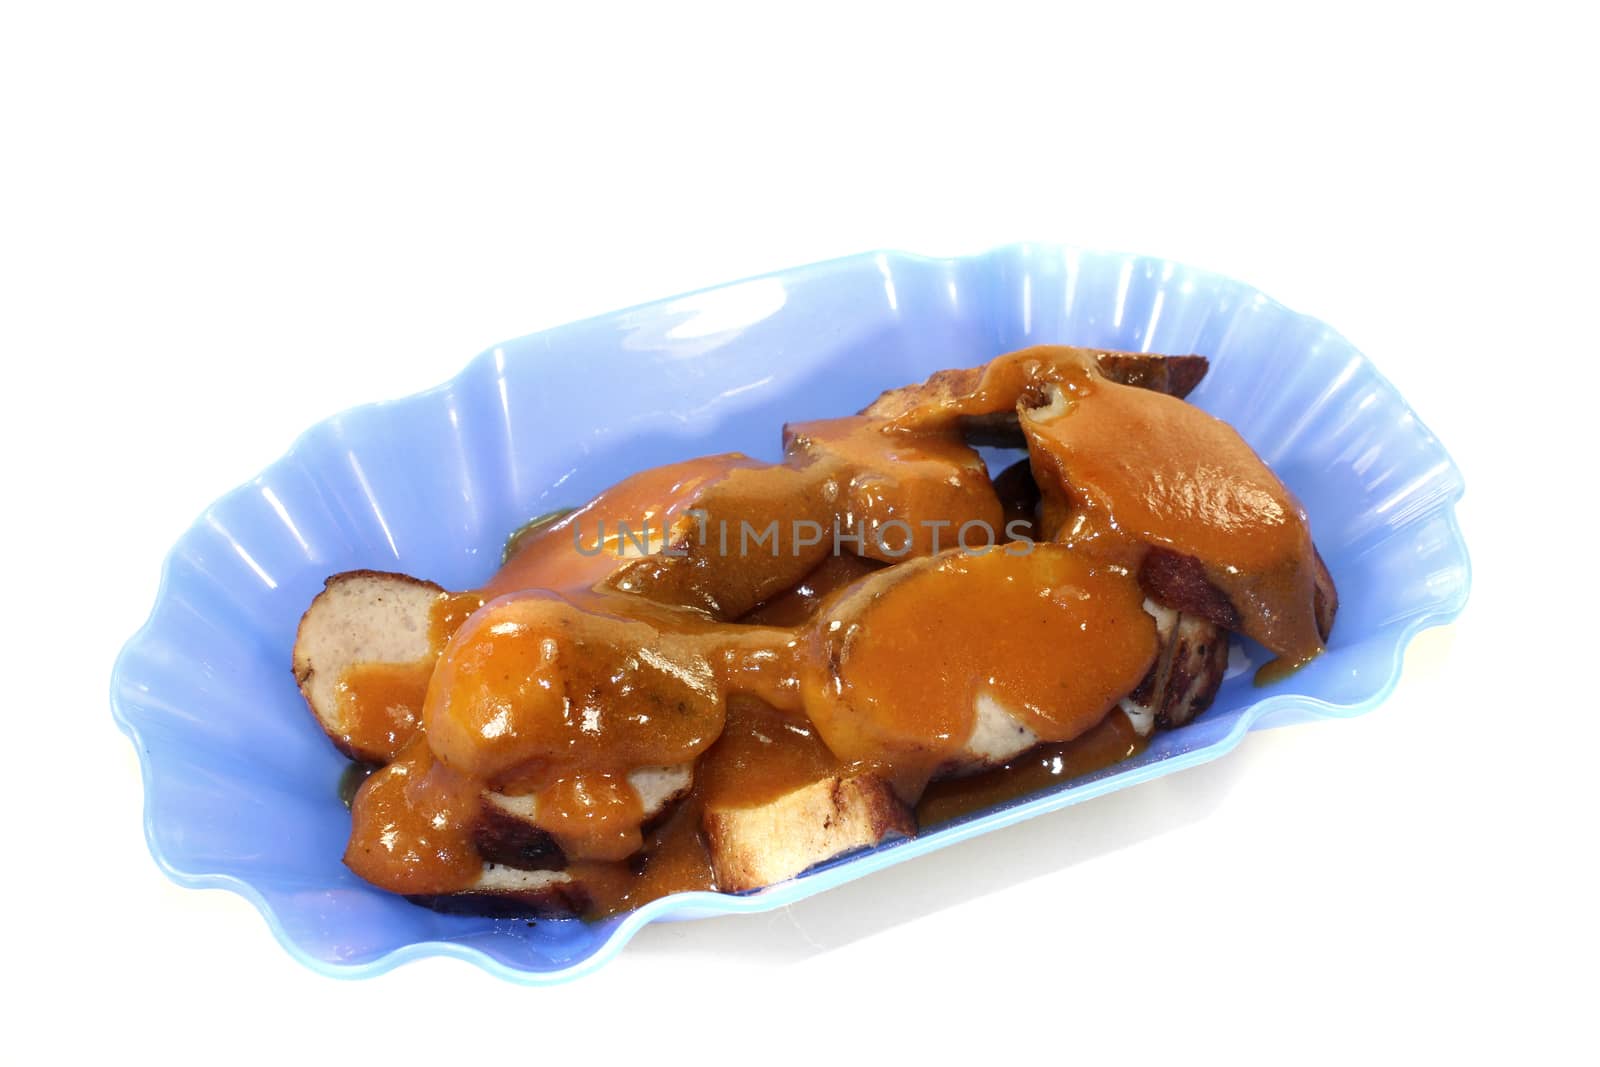 Sausage with curry on a light background